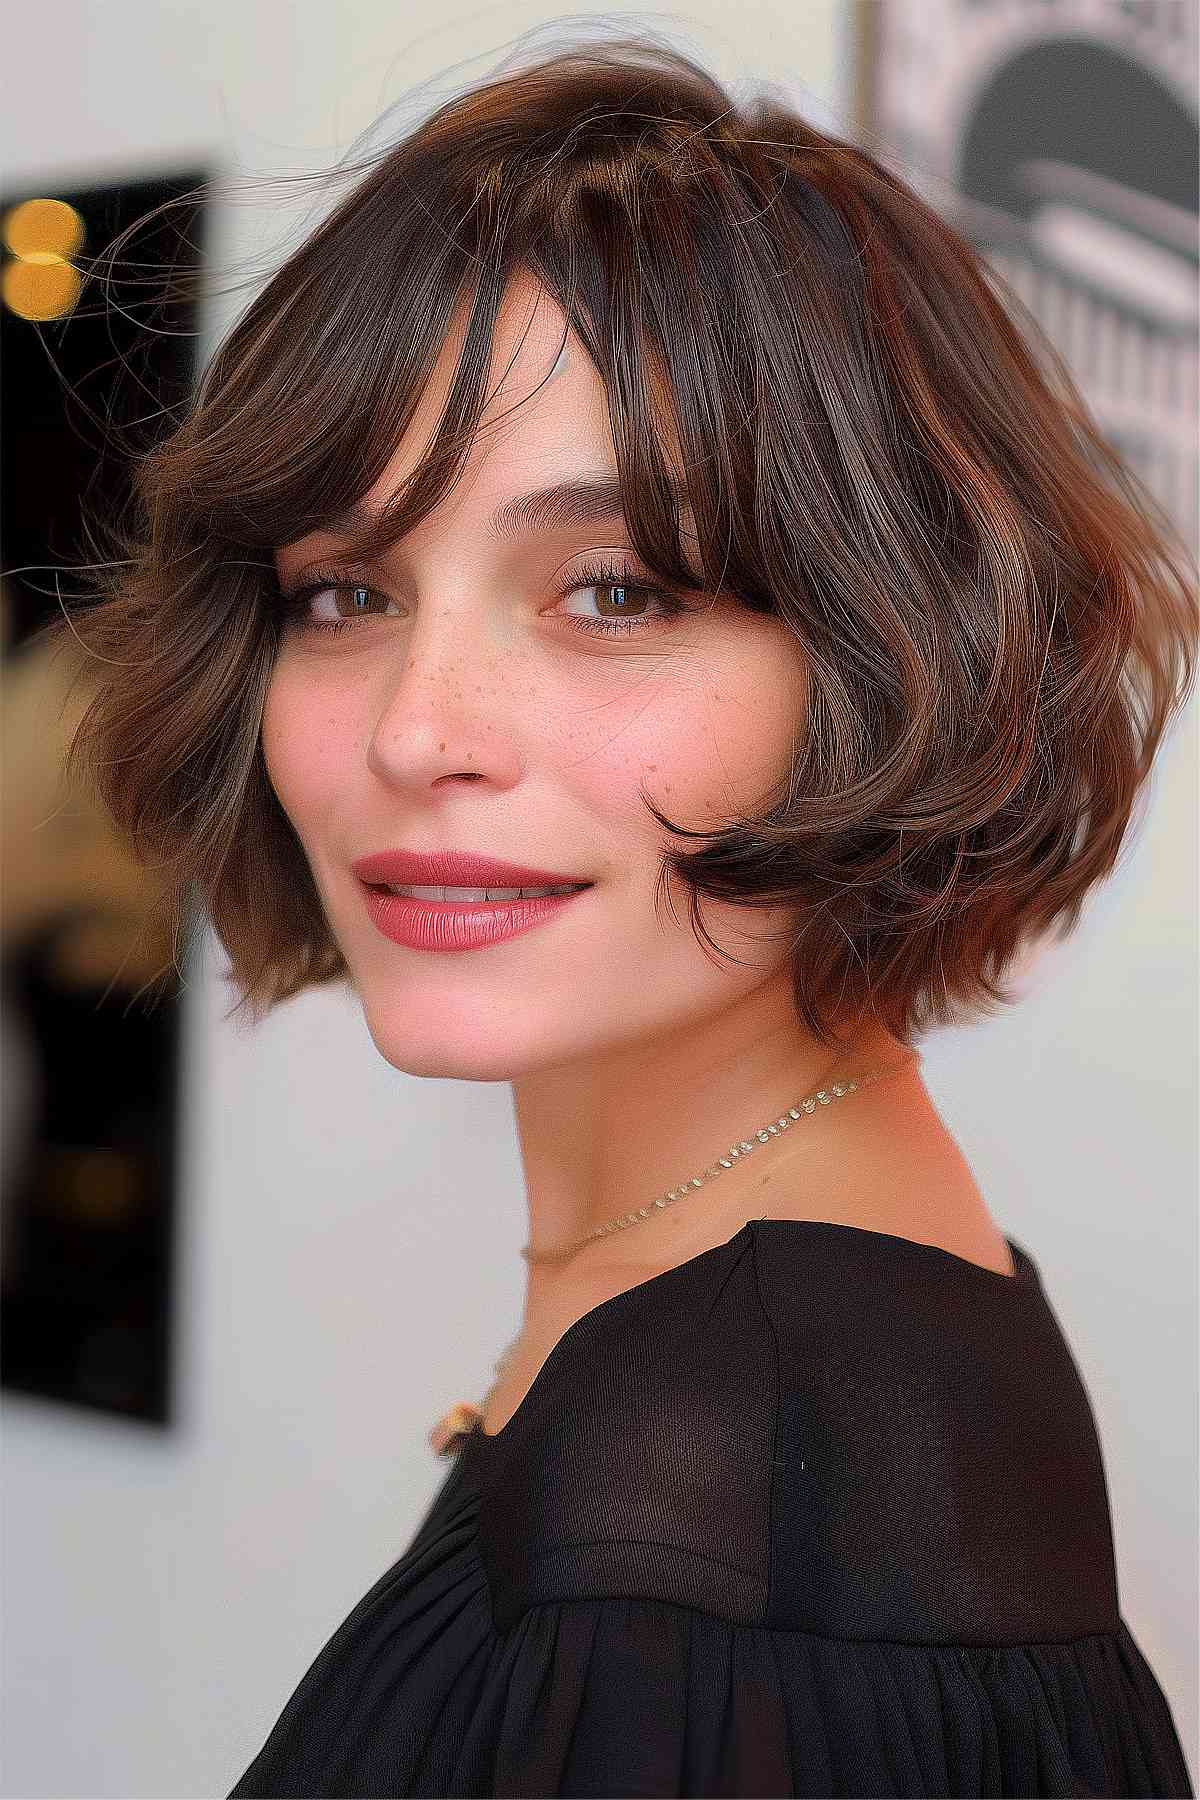 Casual Chanel bob cut with textured, lively ends for a voluminous style.